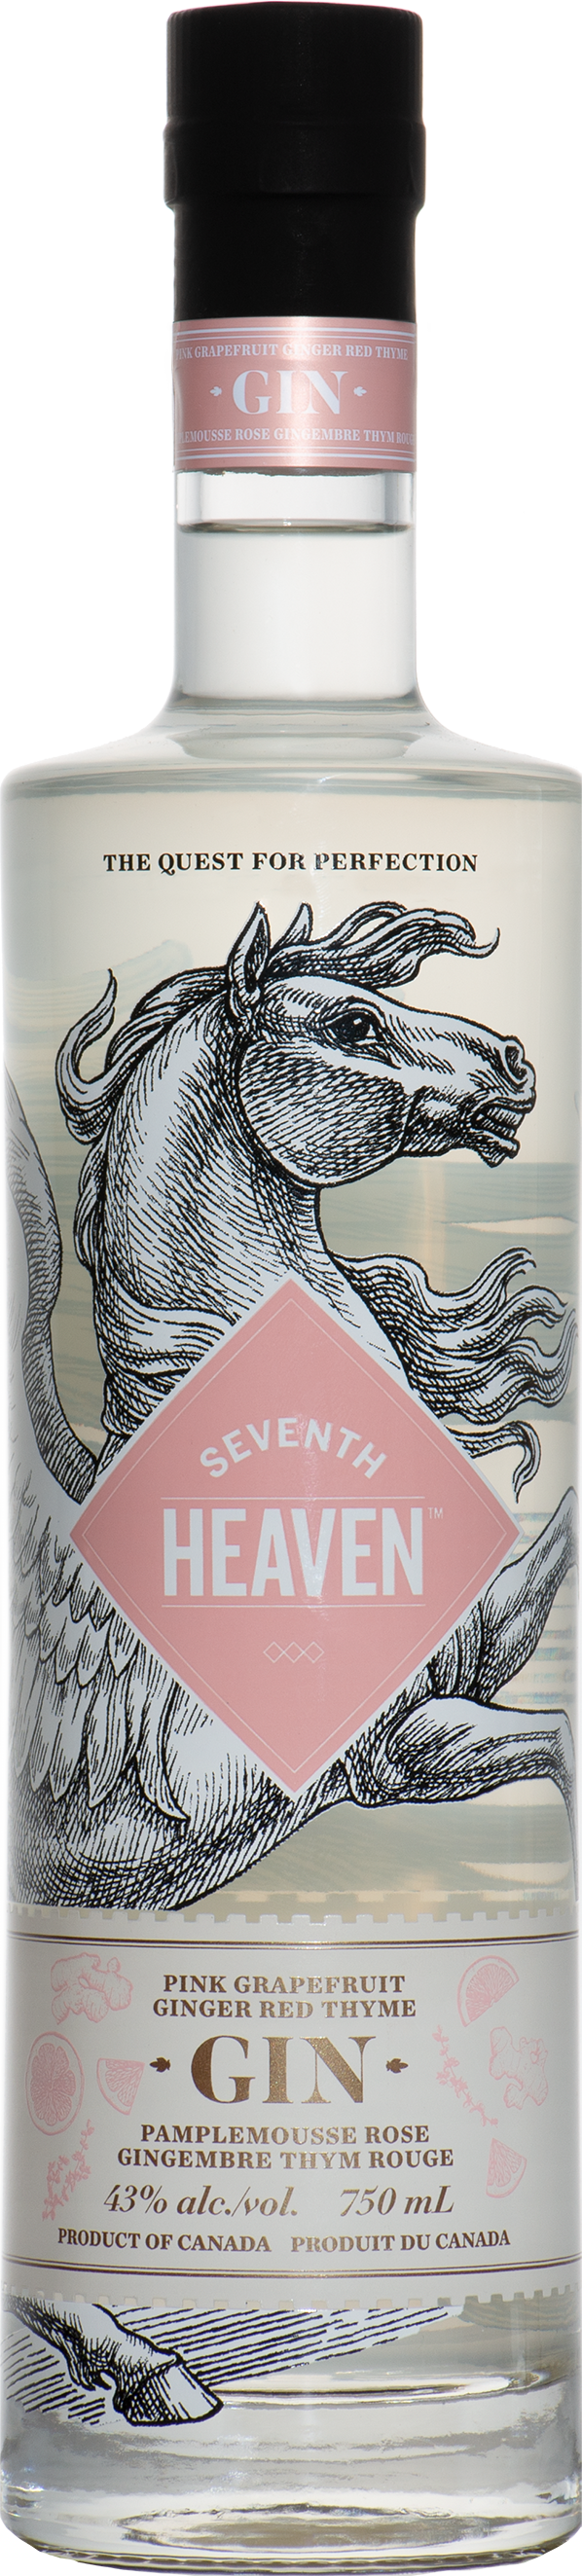 Seventh Heaven Gin Pamplemousse rose, gingembre et thym rouge